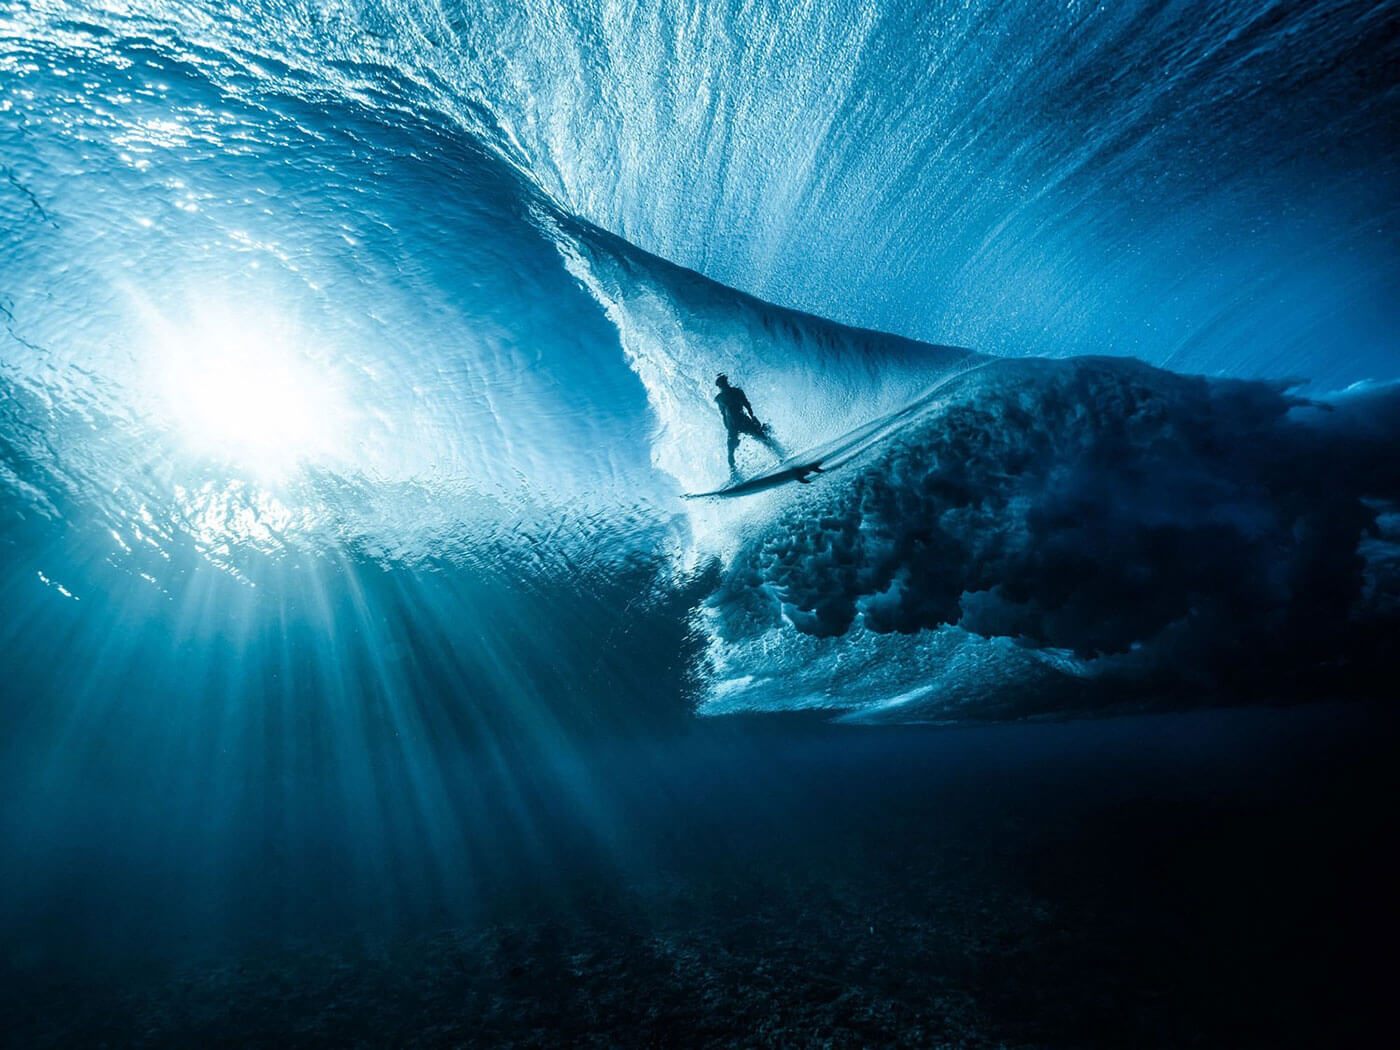 © Ben Thouard / Red Bull Content Pool